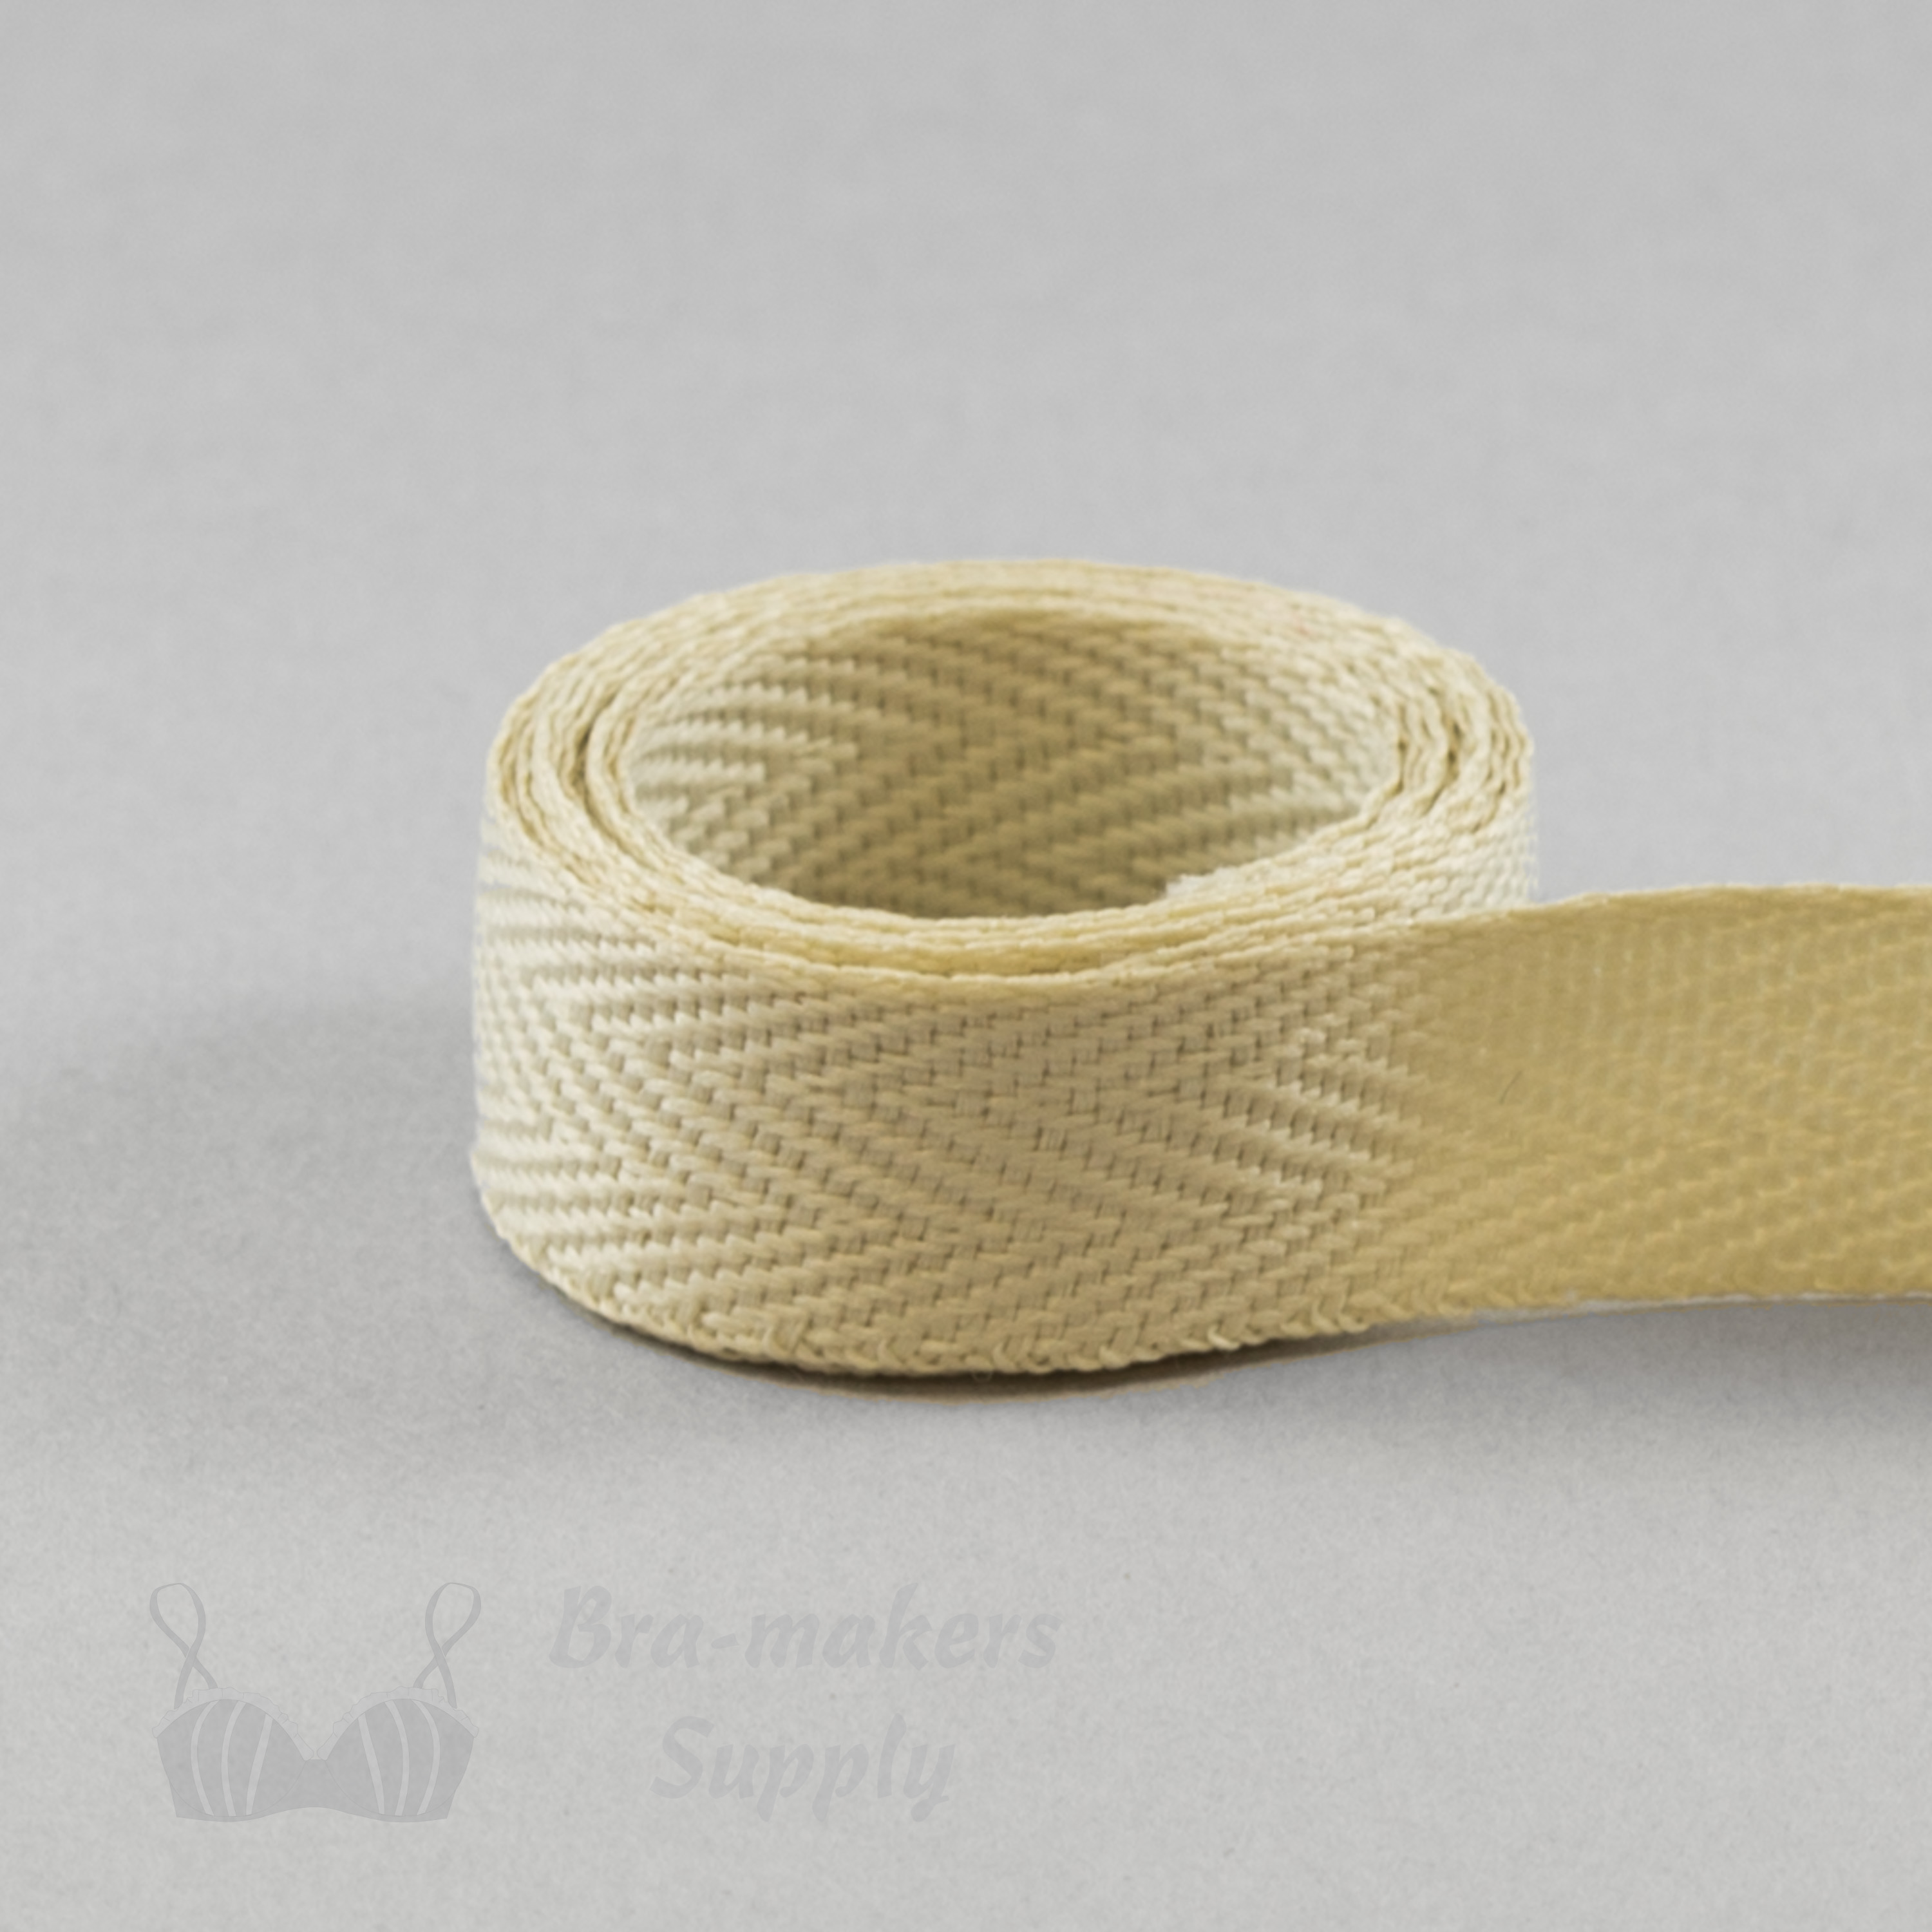 Single Sided Polyester Garment Tape, For Garments, Size: 1 Inch at